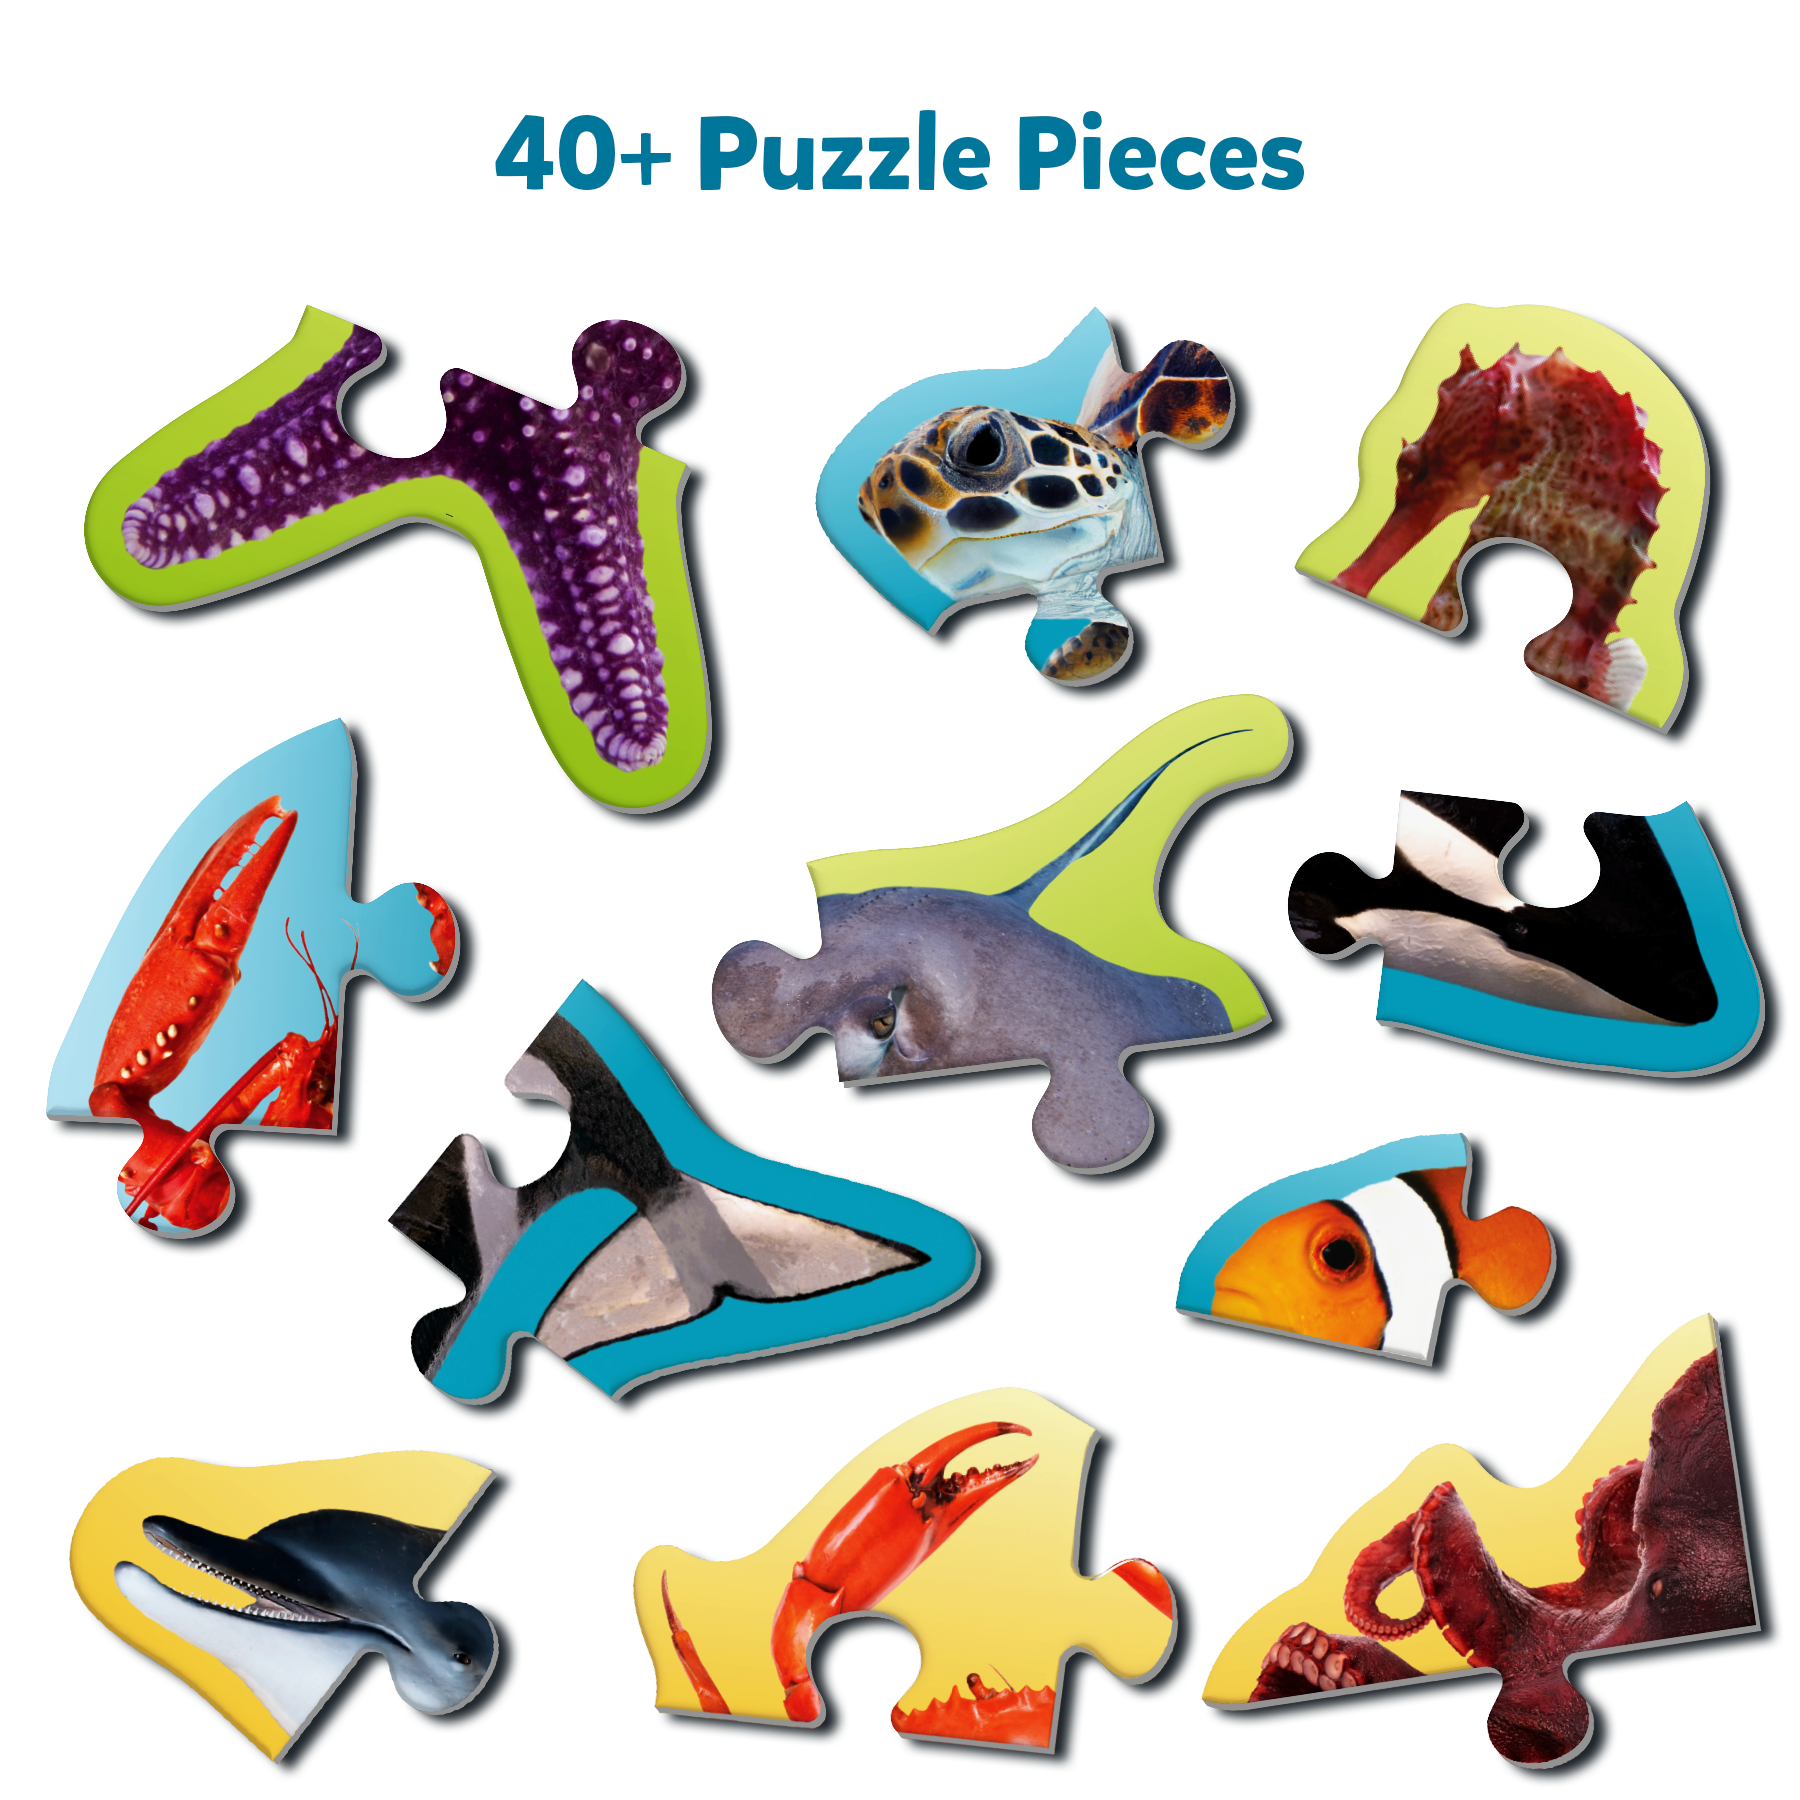 Skillmatics Step by Step Puzzle - 41 Piece Underwater Animal Jigsaw & Toddler Puzzles for Stage-Based Learning, Educational Montessori Toy Boy & Girl, Gifts for Kids Ages 3 and Up